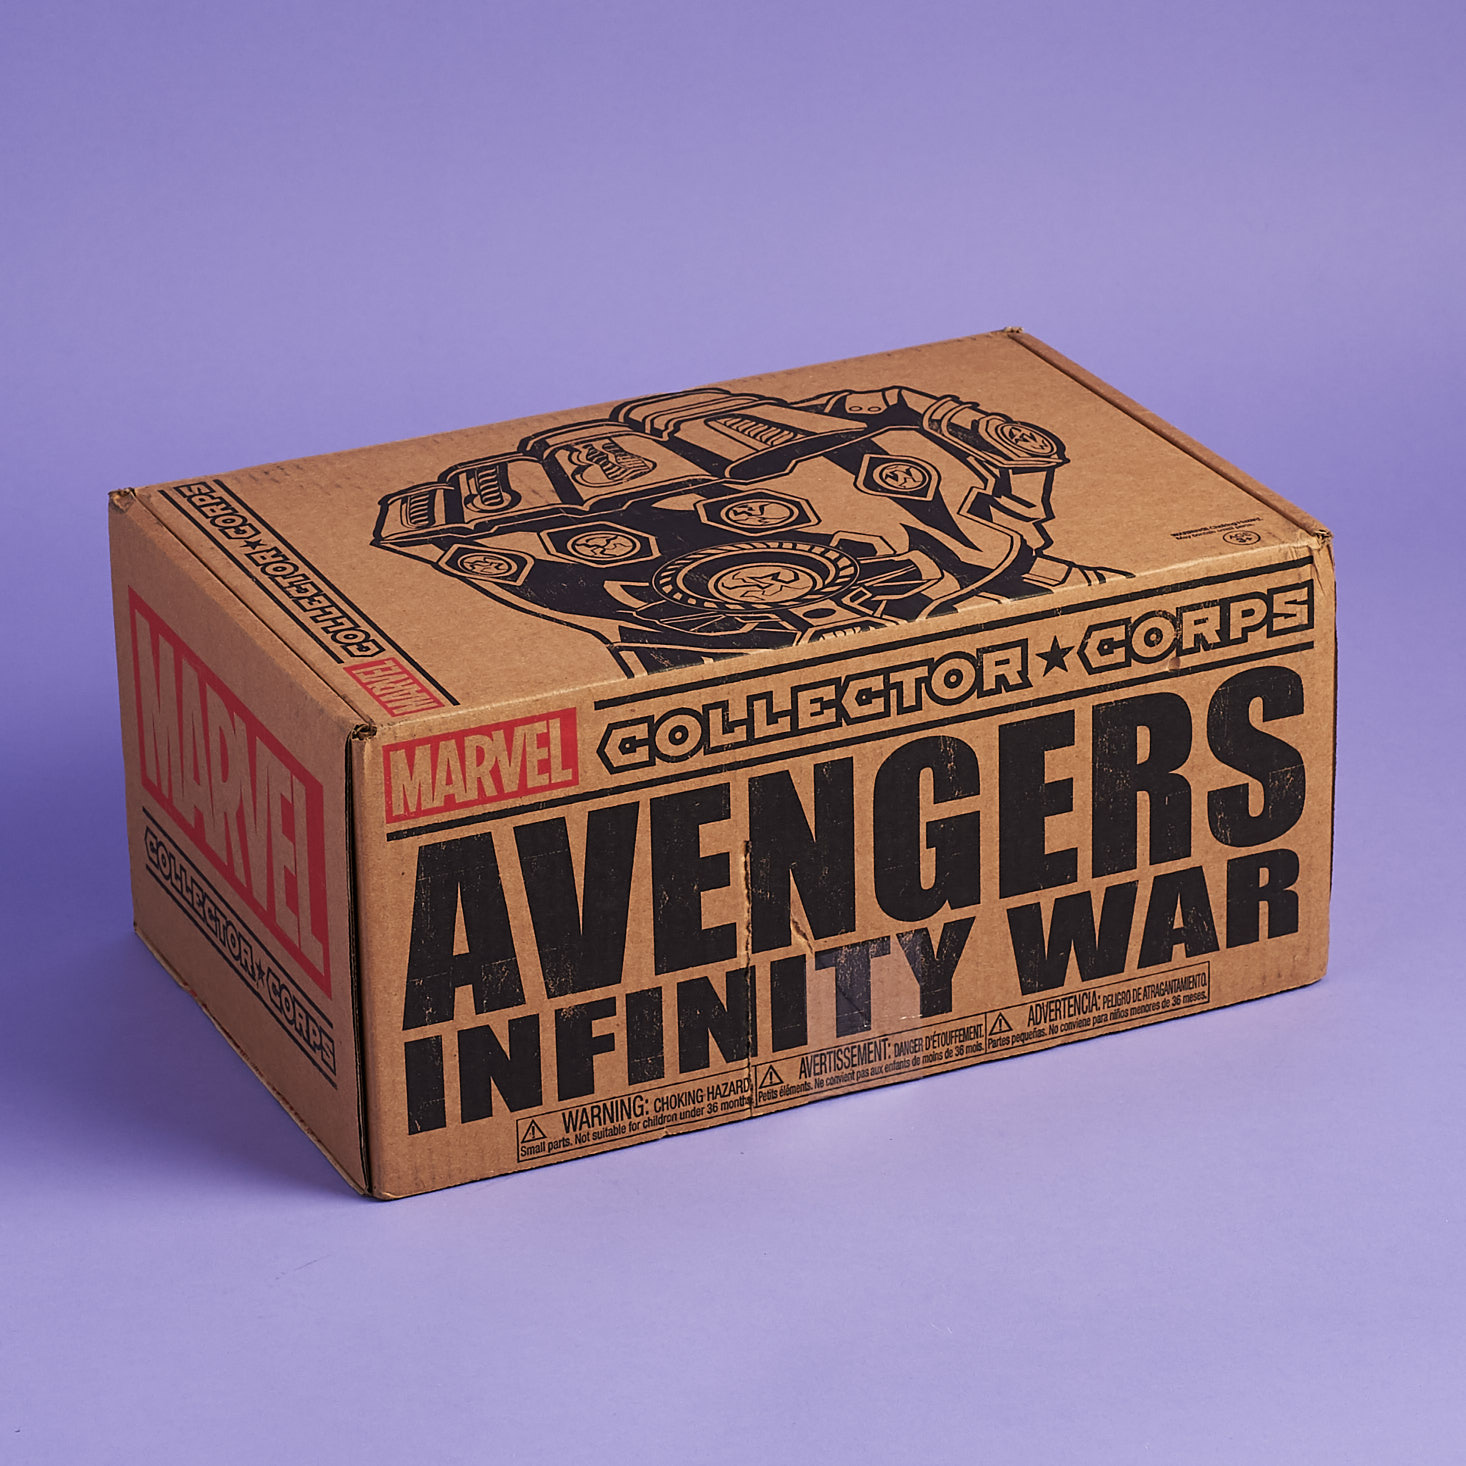 Funko Infinity War Box Now Available For Non-Subscribers!